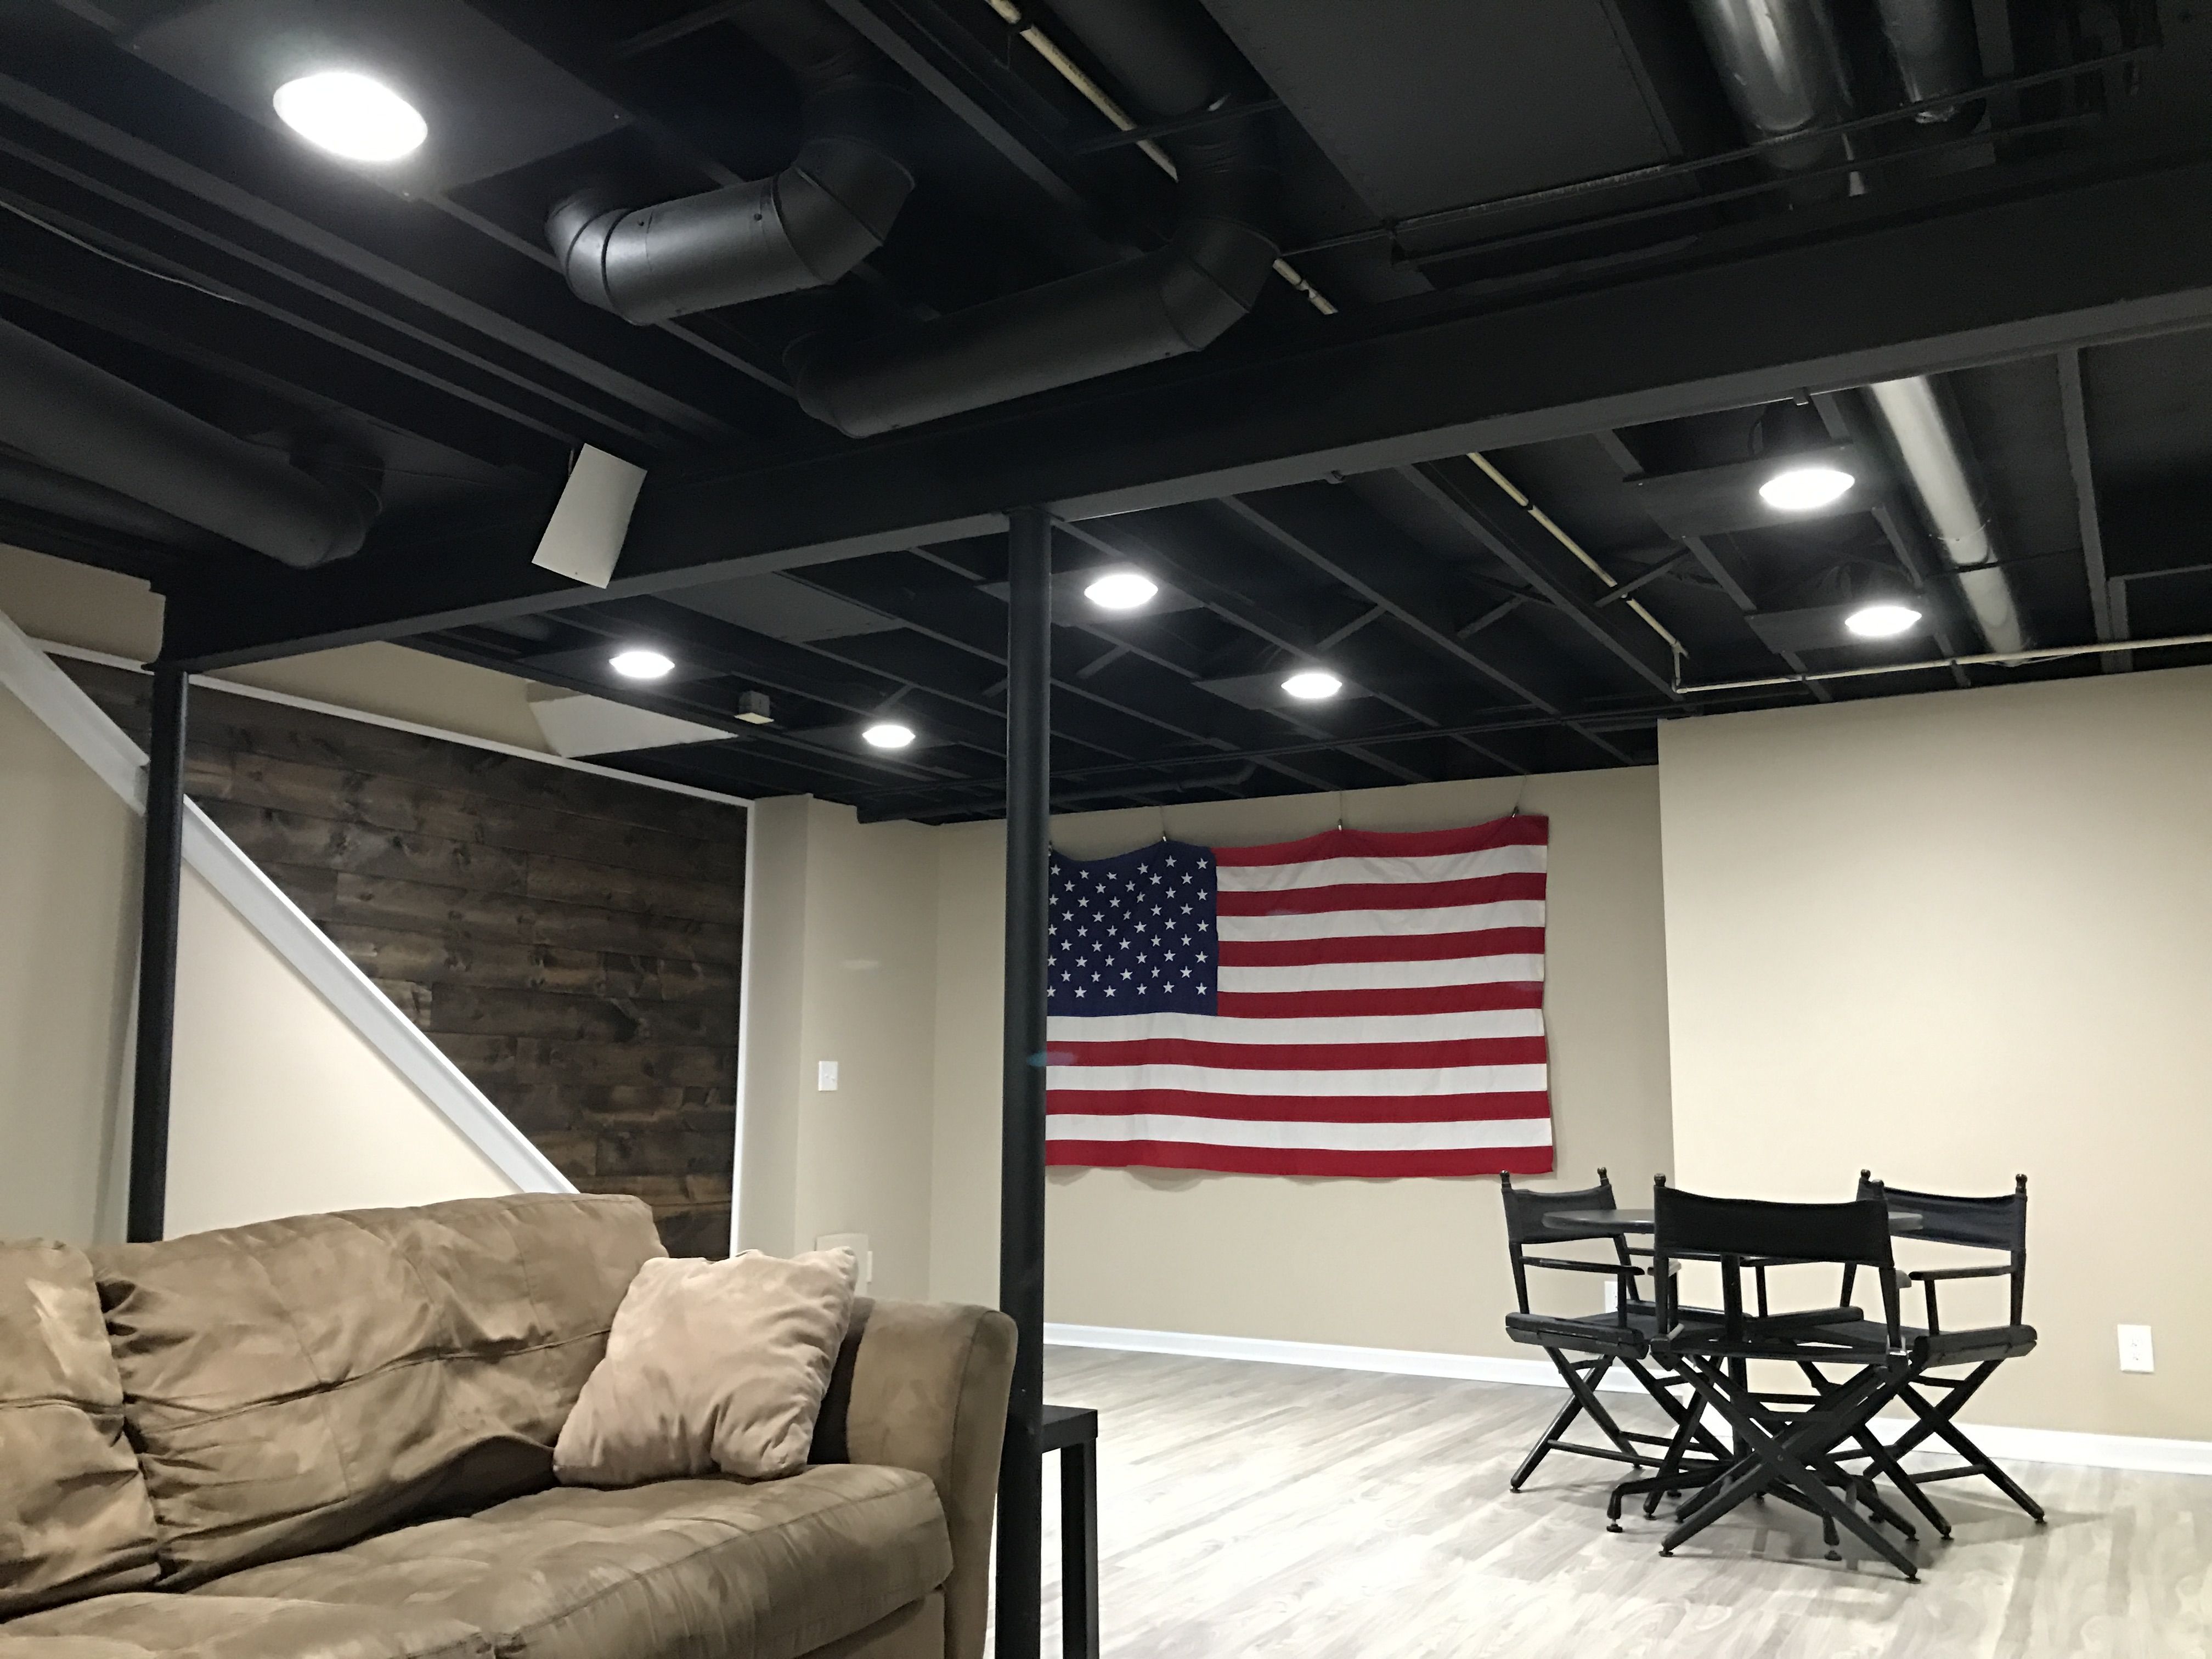 New Painting Basement Ceiling - hypermallapartments